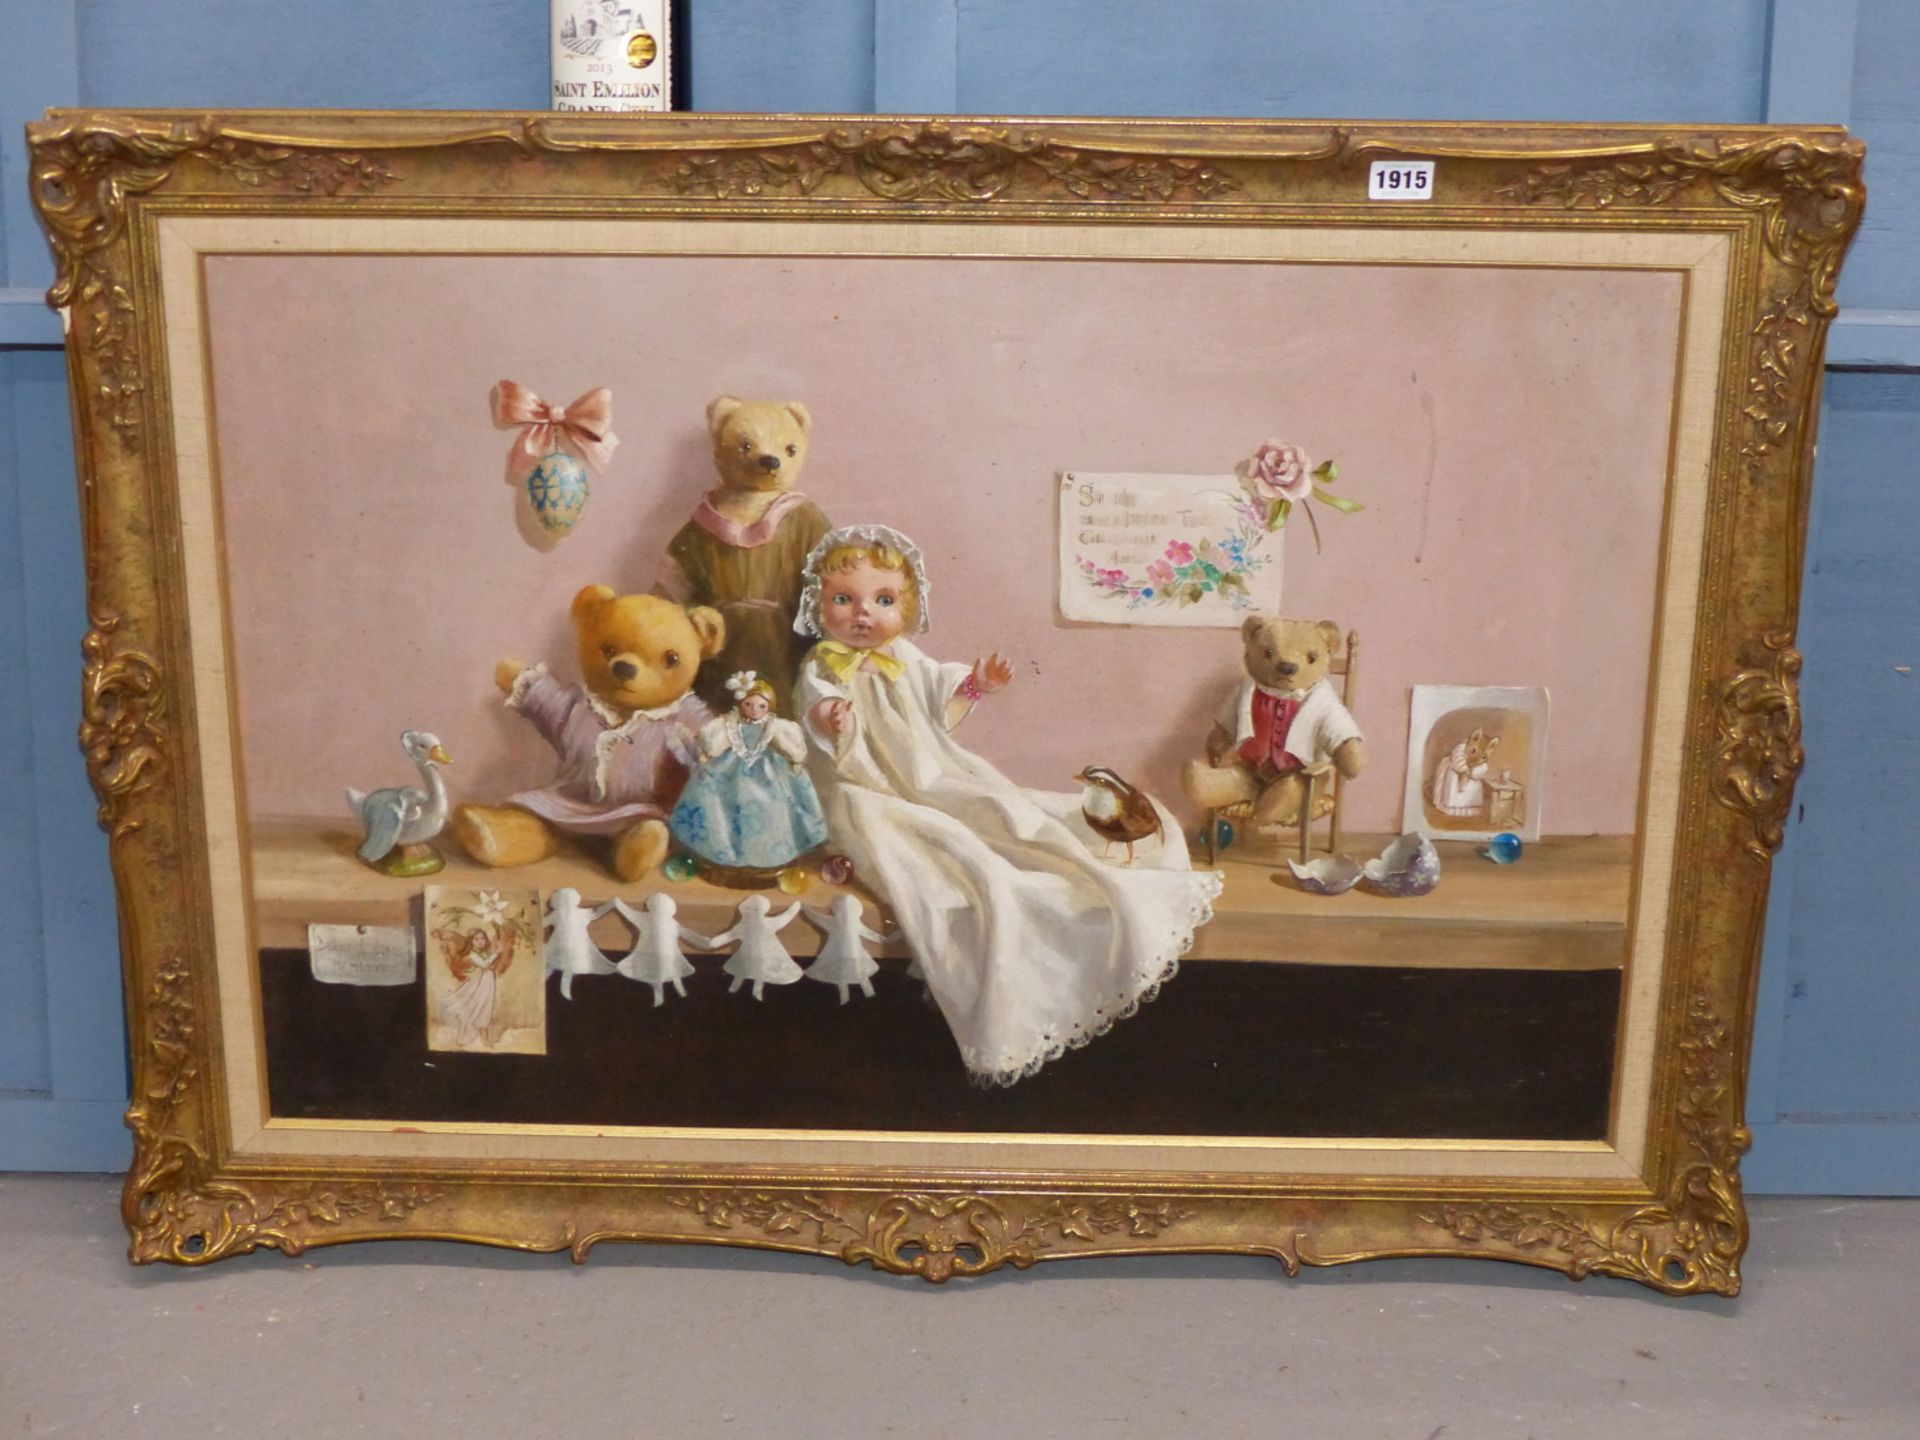 DEBORAH JONES (1921-2012) ARR, TEDDY BEARS AND DOLLS ON A SHELF, SIGNED AND DATED 1982, OIL ON - Image 2 of 5